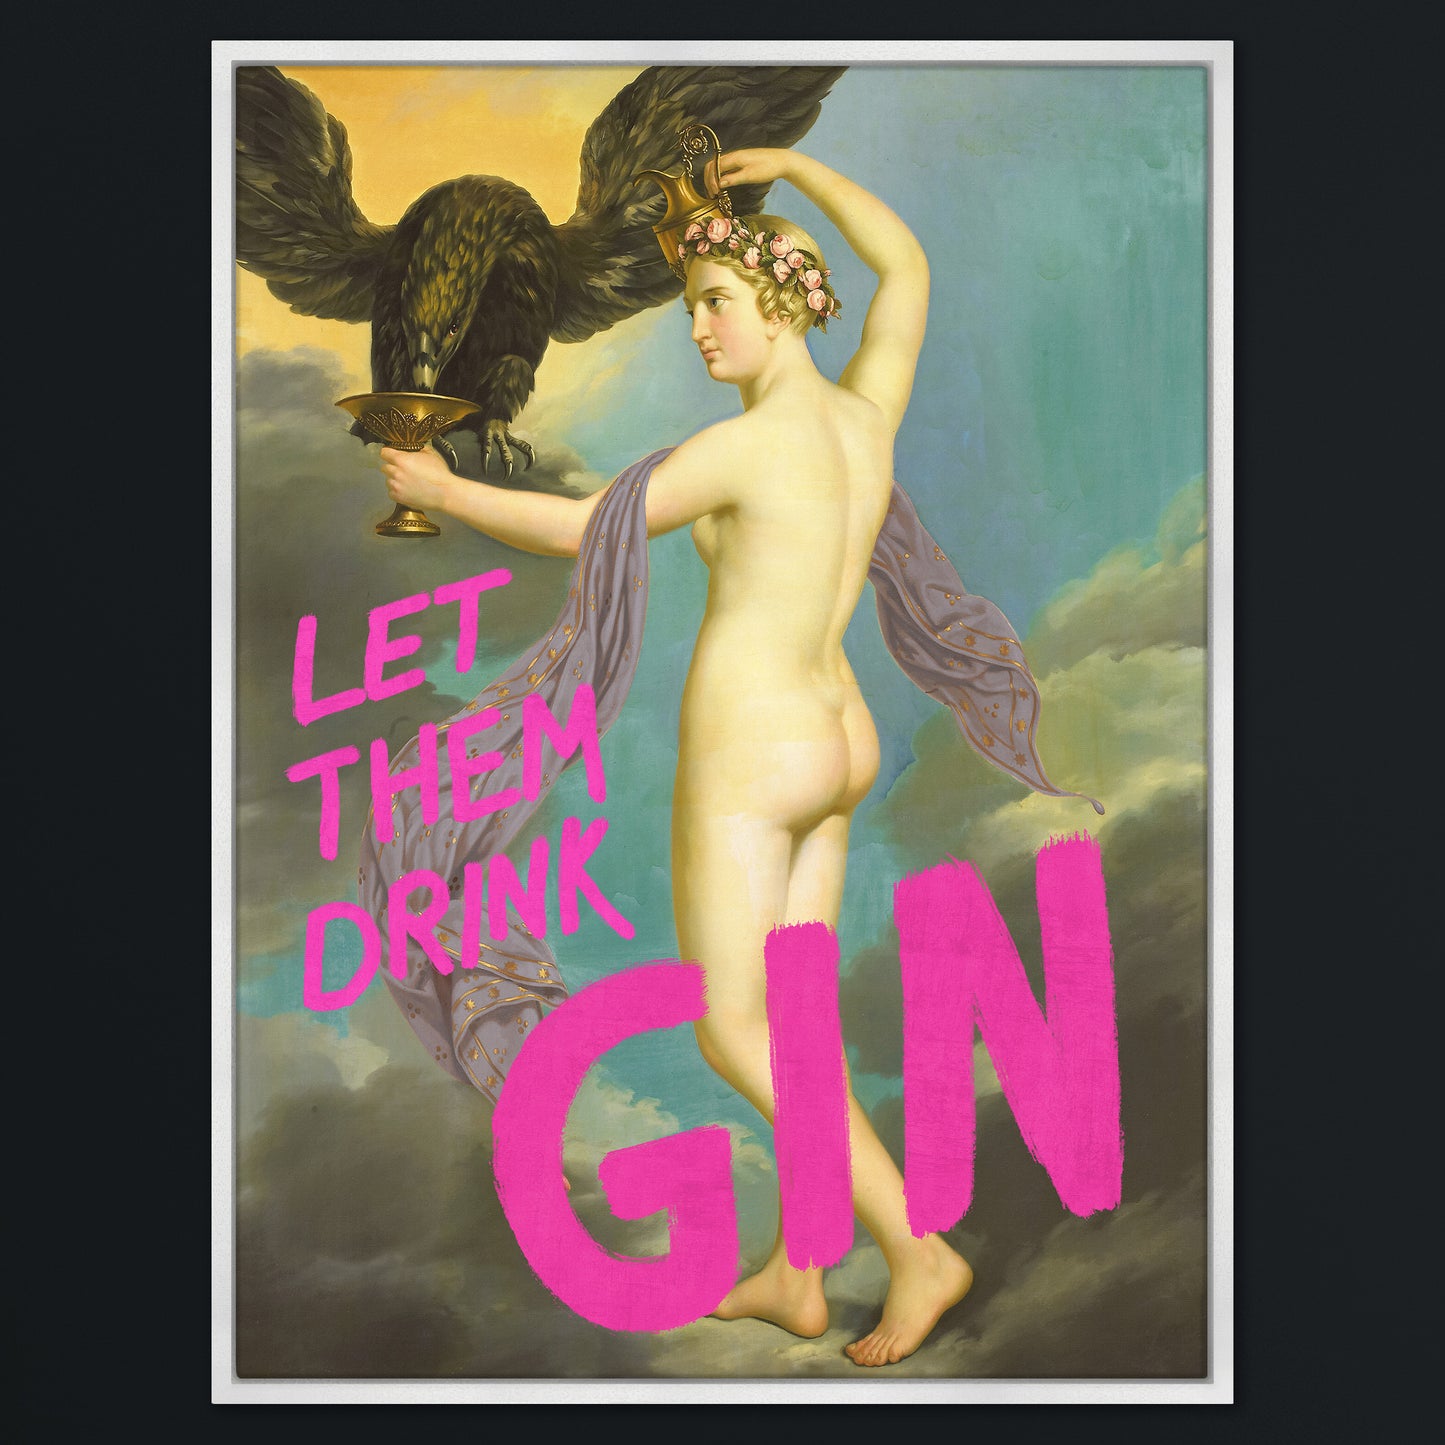 Let Them Drink Gin Canvas Print